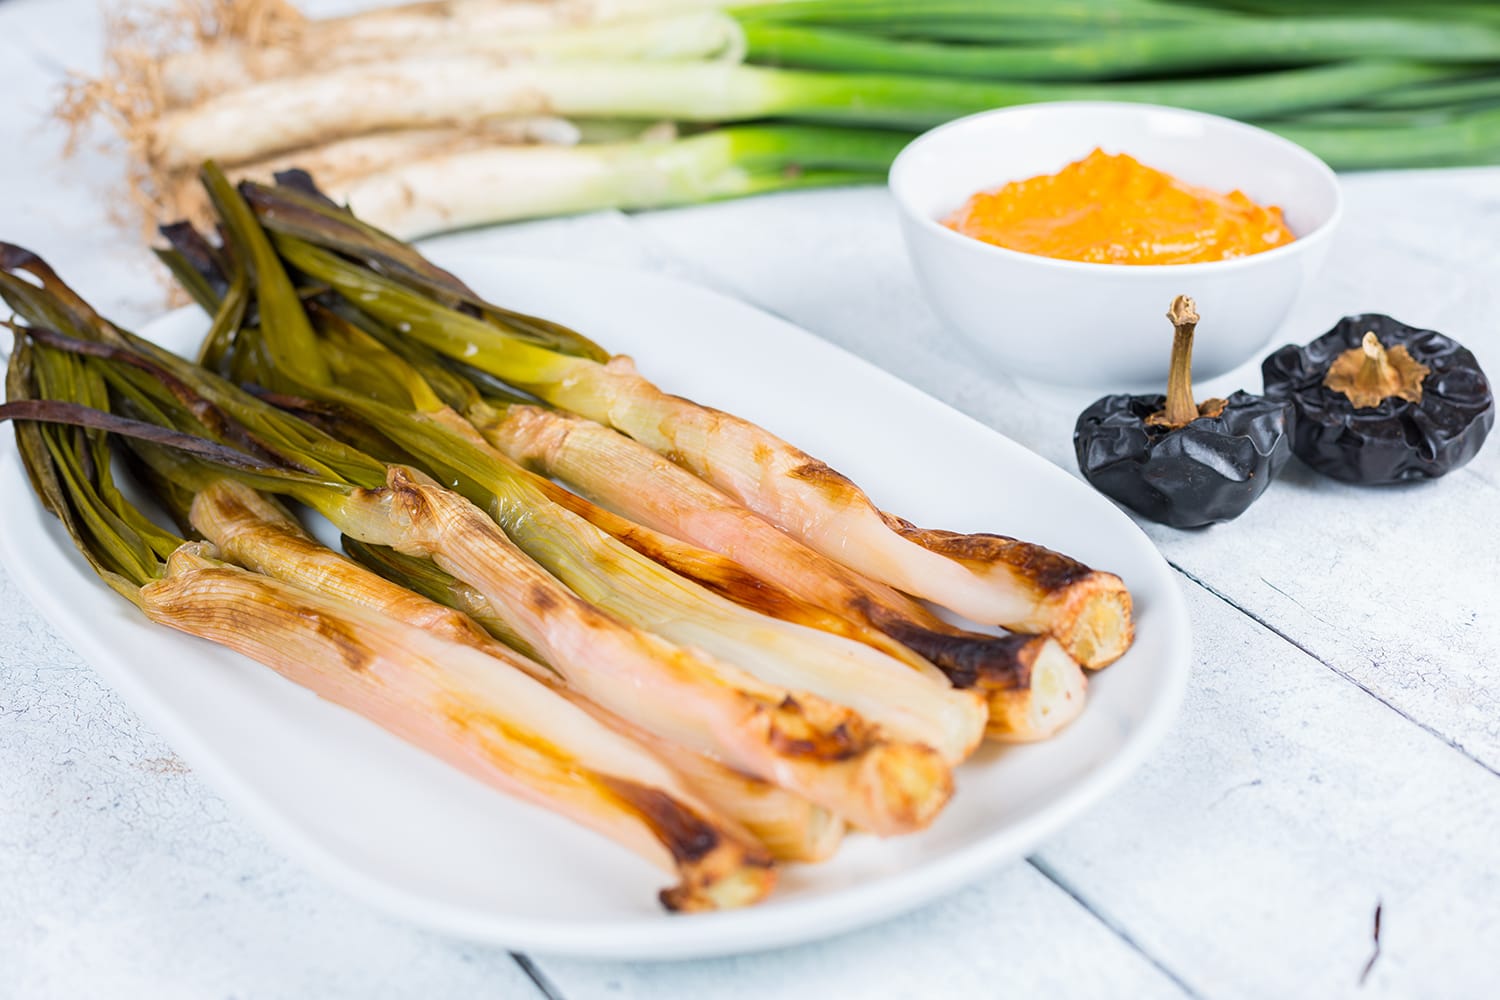 Calçots cooked on the fire, typical food of Catalonia